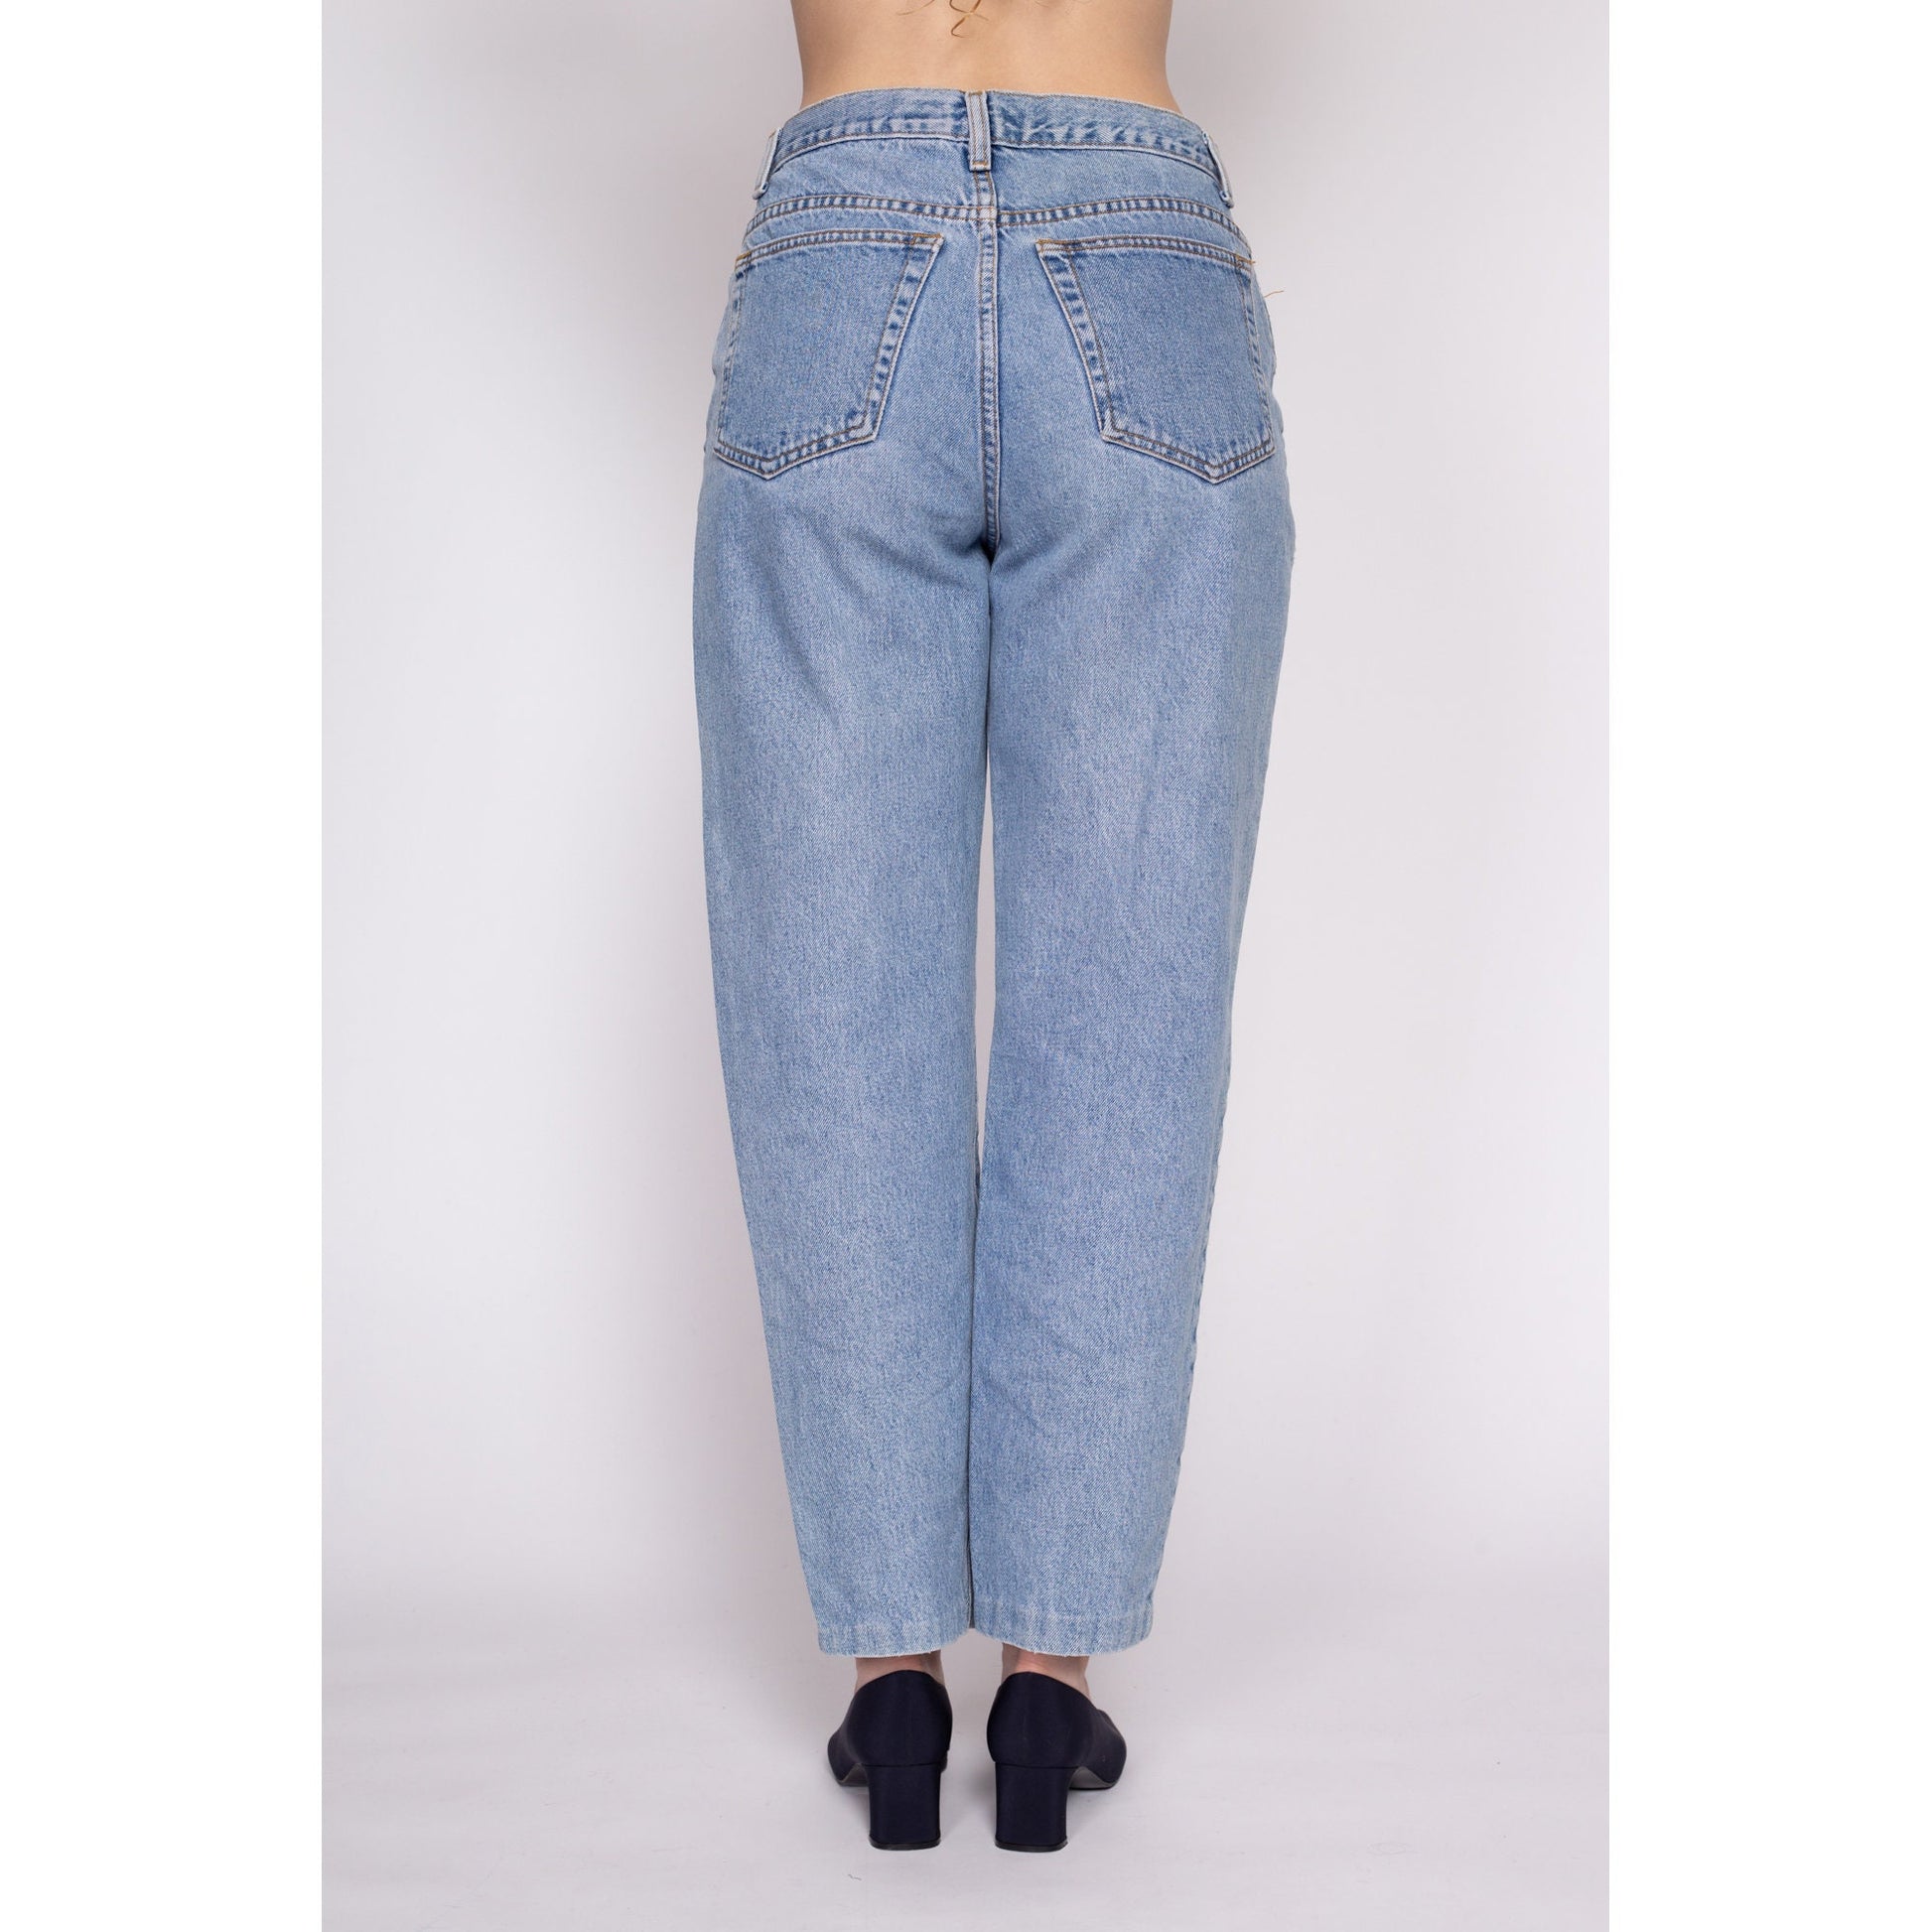 90s The Limited High Waisted Jeans - Medium, 30 – Flying Apple Vintage